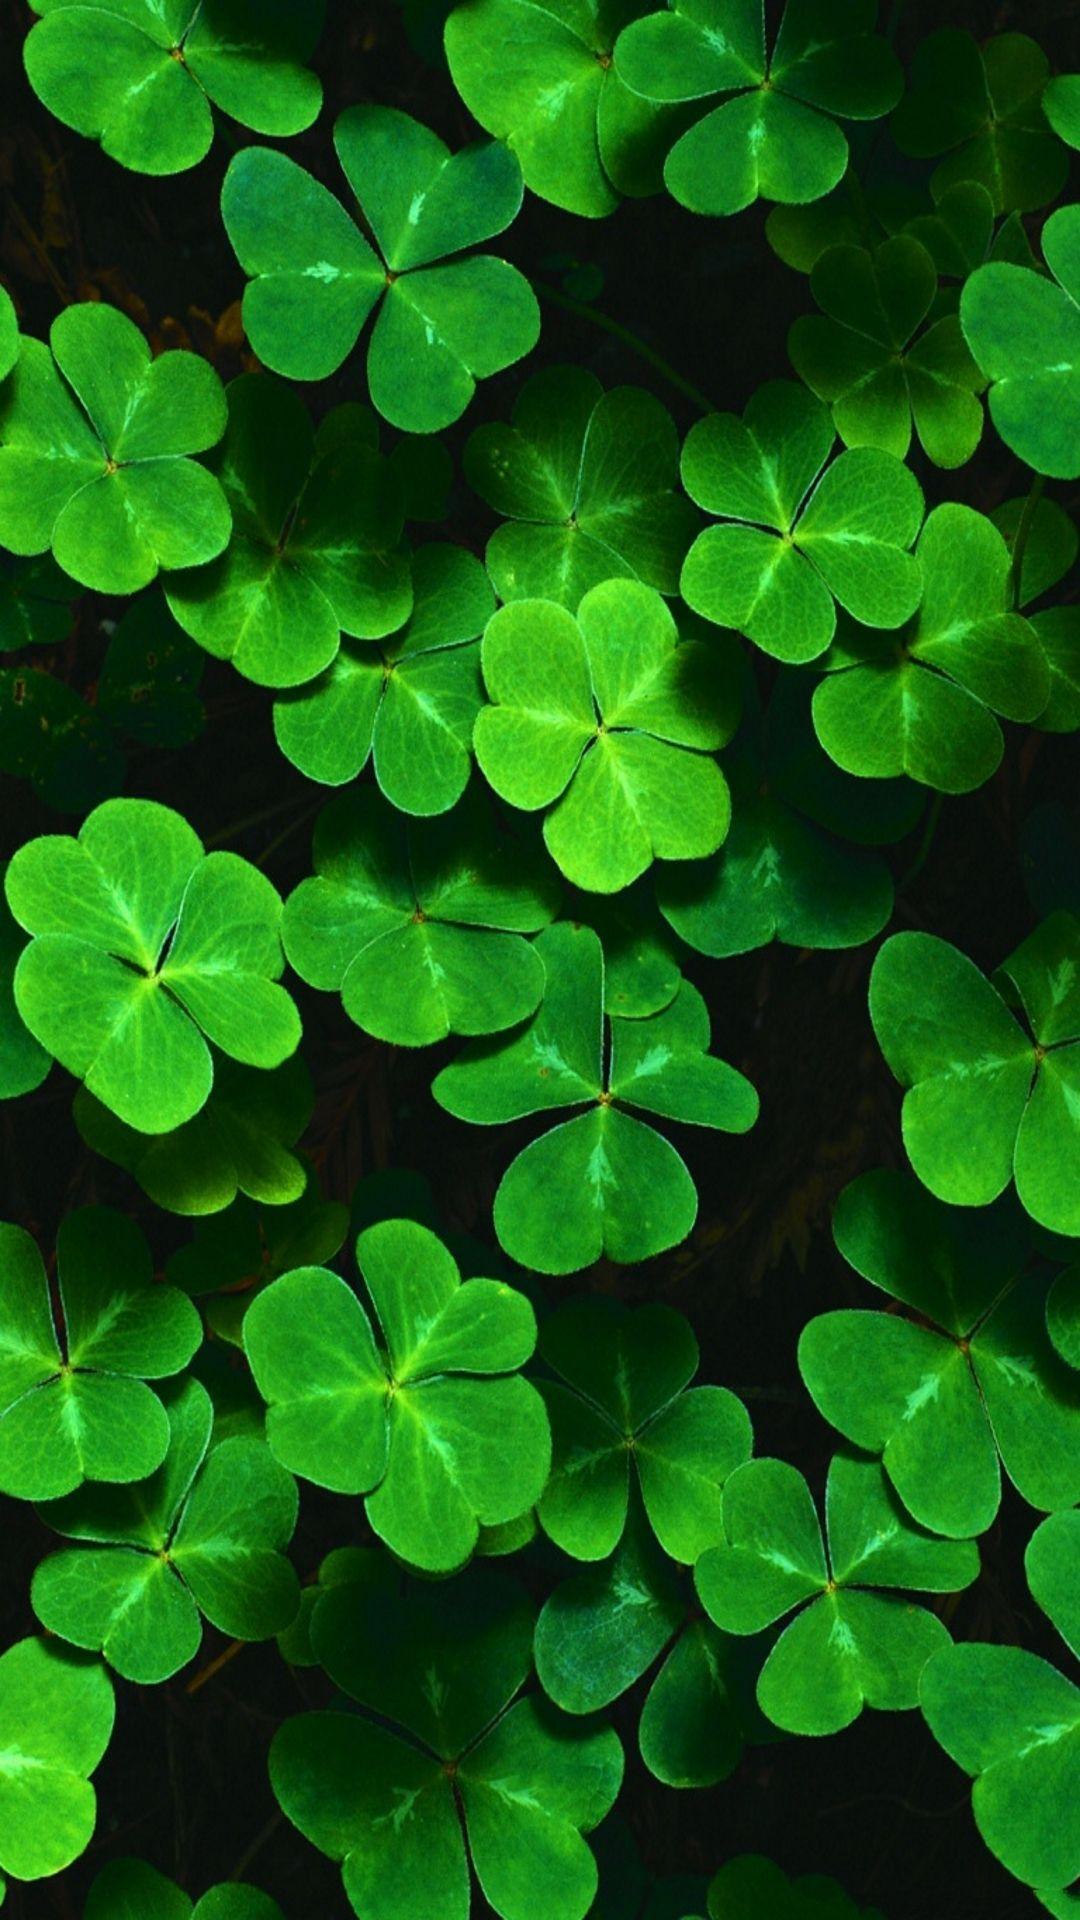 Cellphone Background / Wallpaper for St. PATRICK'S DAY. ☘. Irish